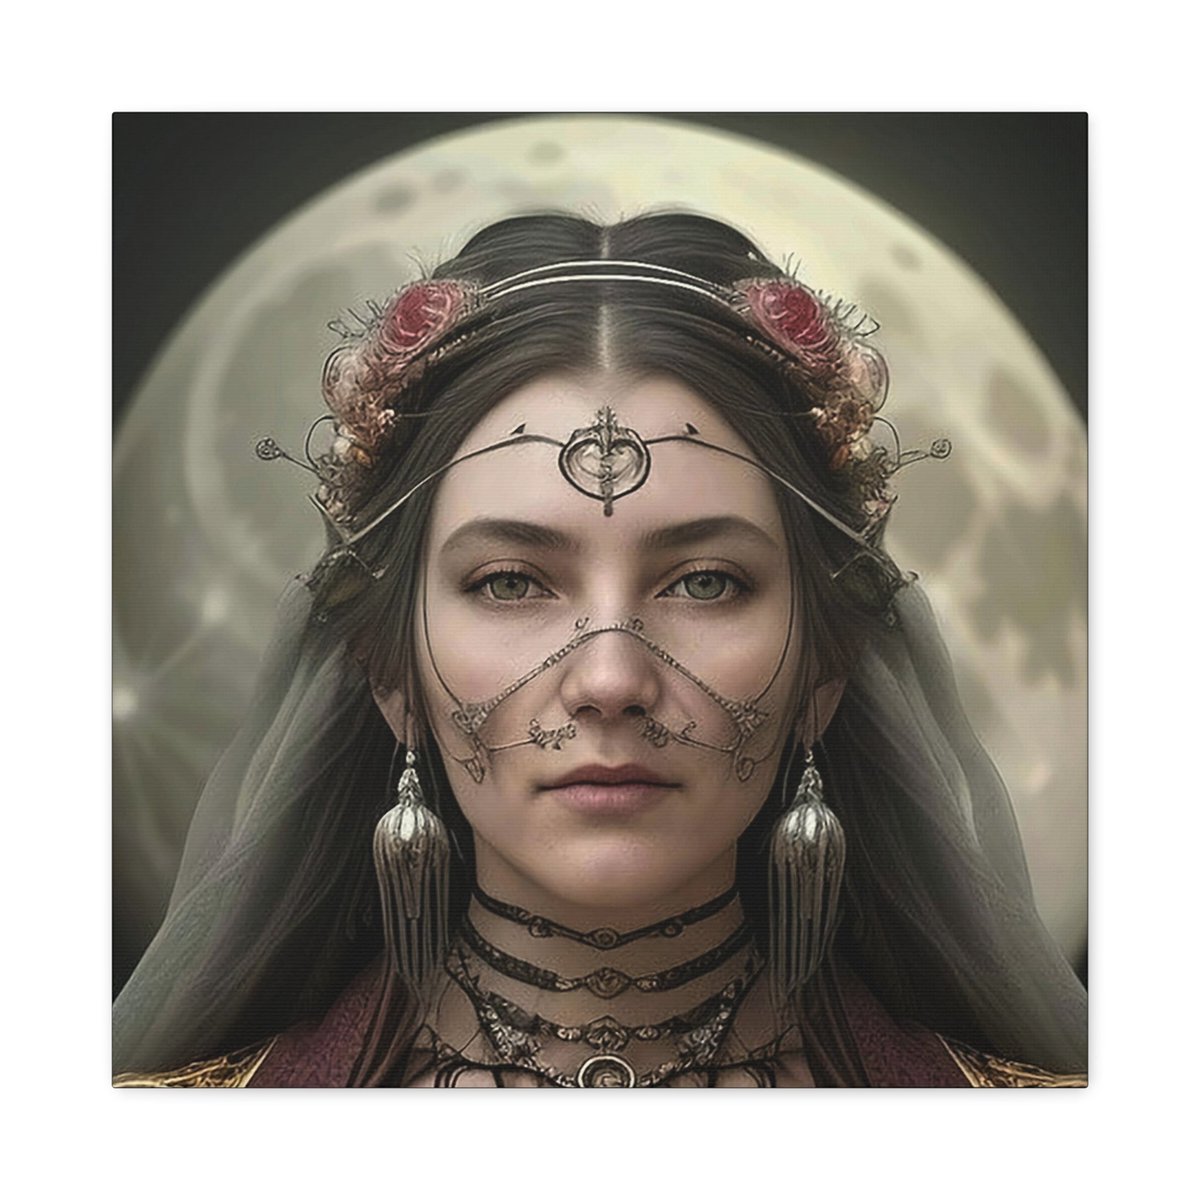 Excited to share the latest addition to my #etsy shop: Sisters of the Moon: The Strega of Italy - Unframed Digital Print on Canvas - Witchcraft and Folklore Art etsy.me/3IUCKQe #printingprintmaking #witchart #digitalcanvas #folkmagicart #divinationart #moonwitc